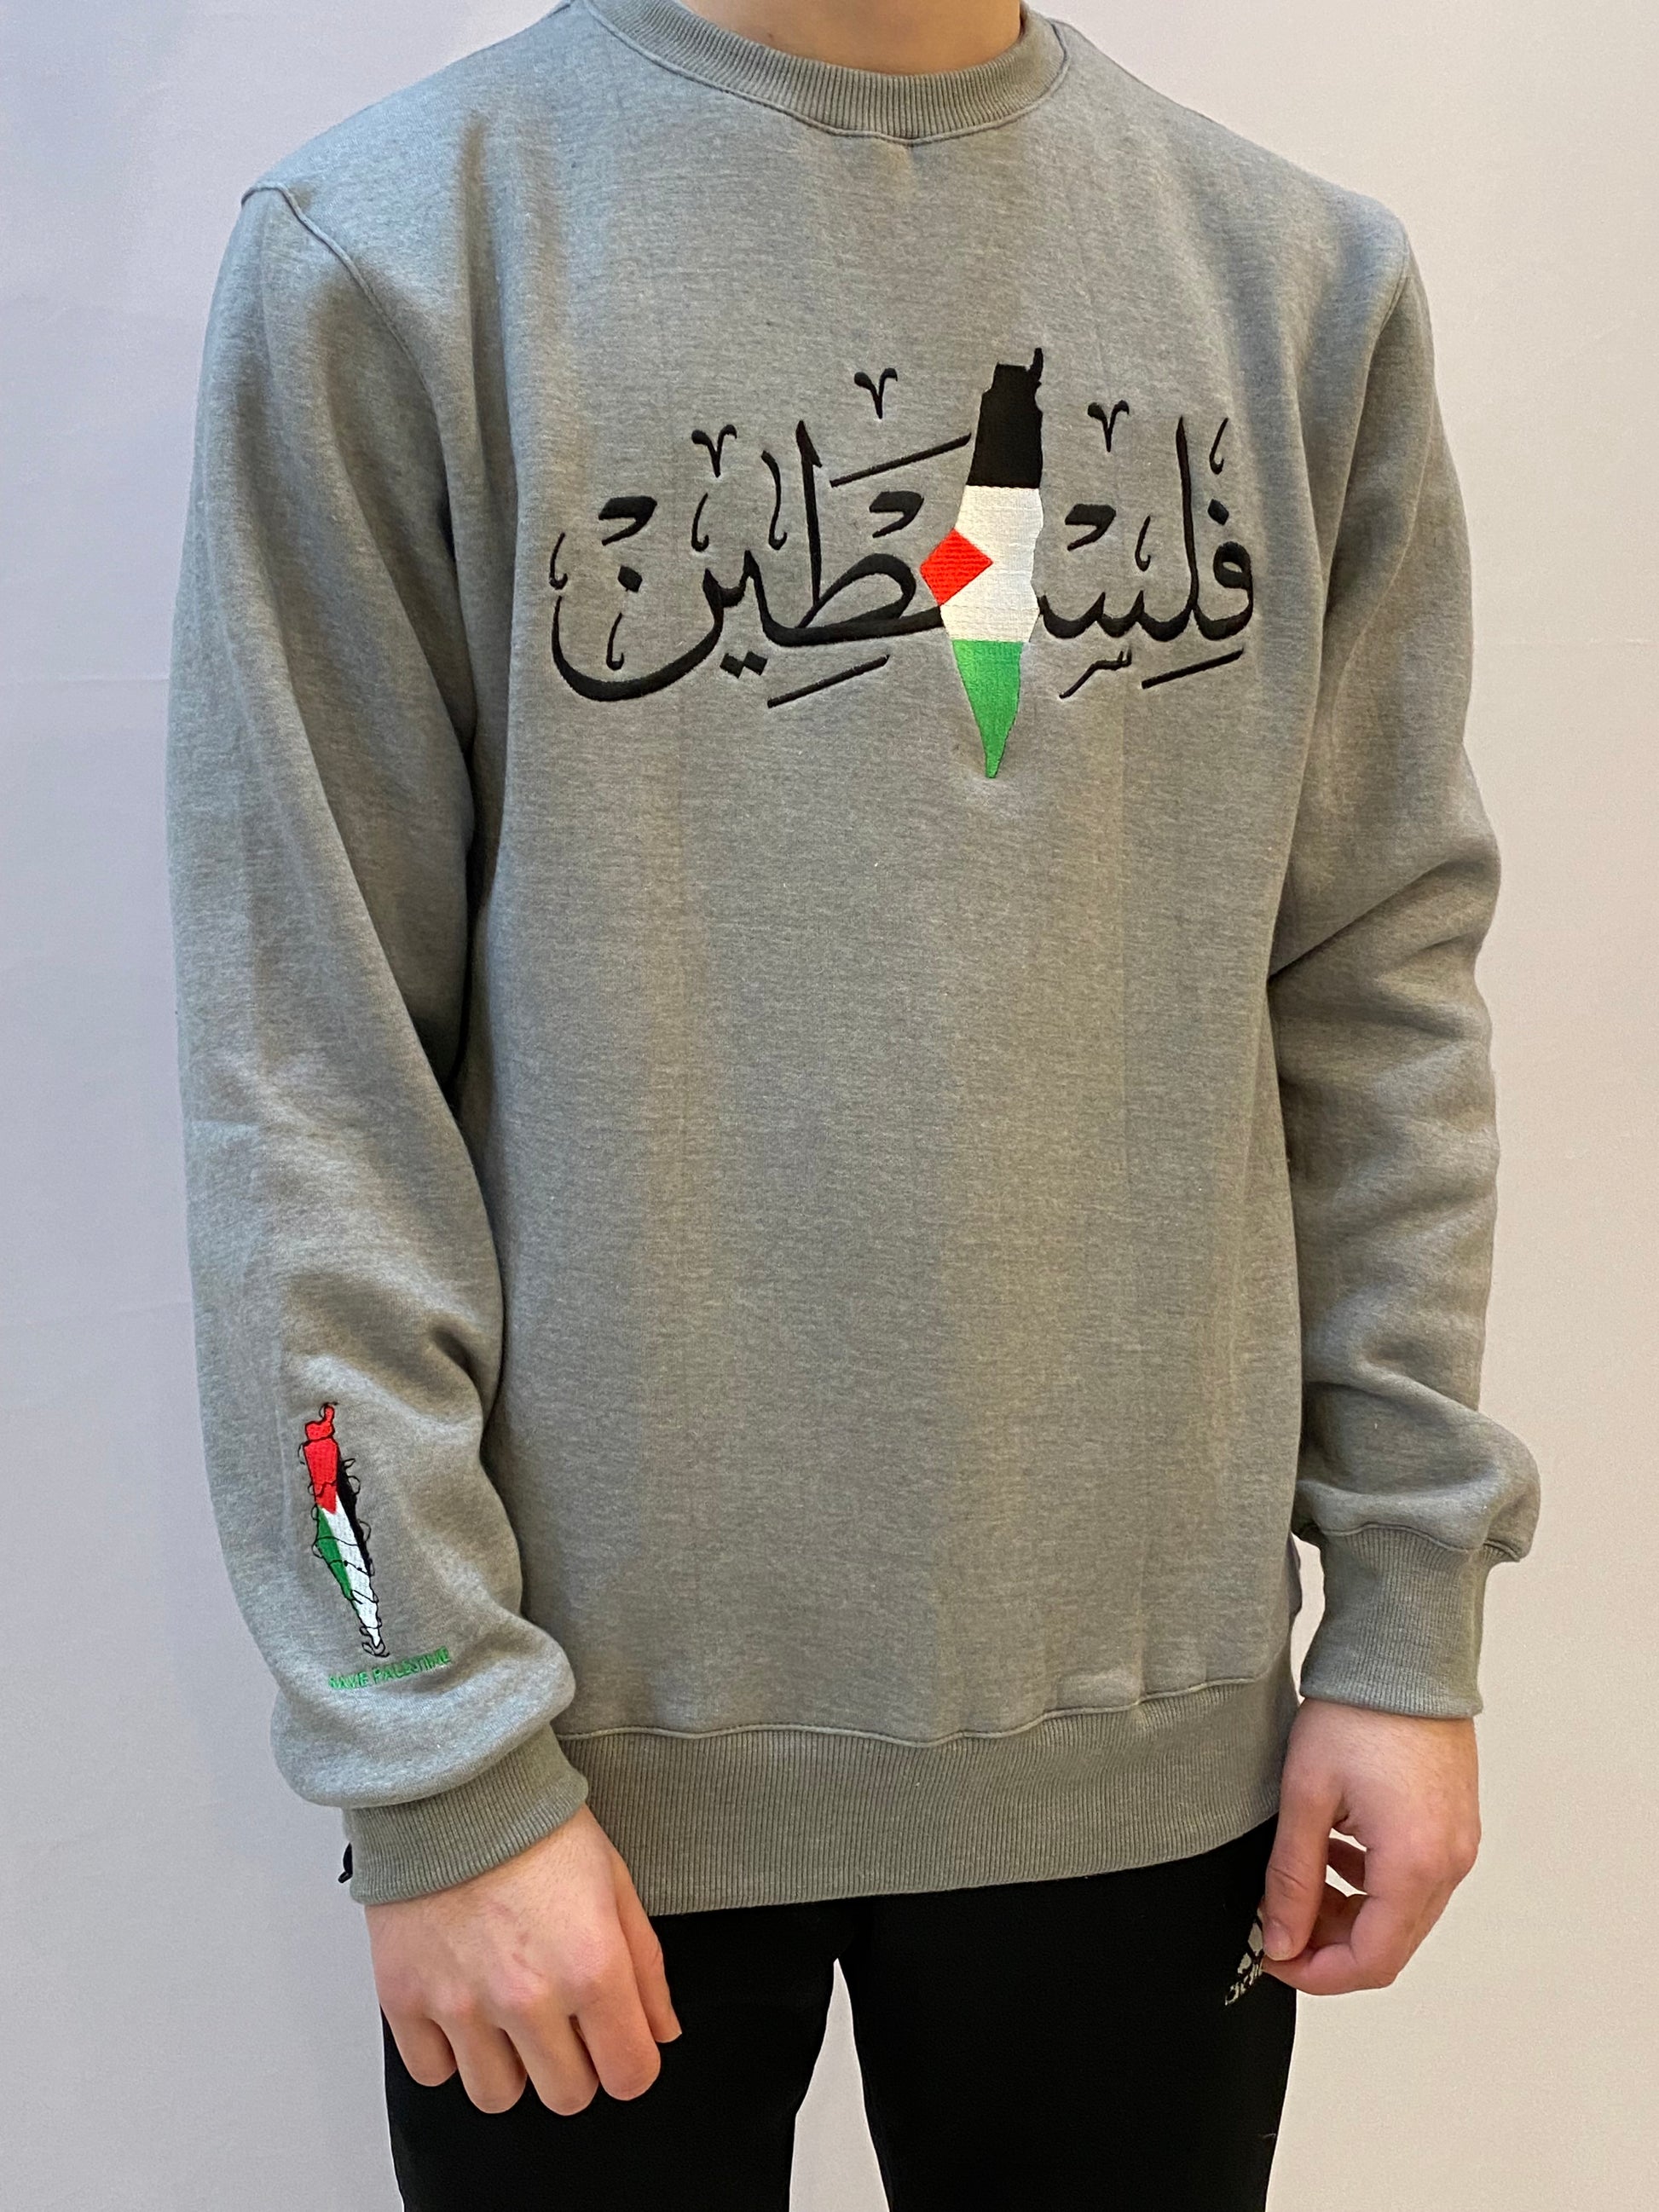 Palestinian Heritage Embroidered Sweatshirt: Embracing Centuries of Tradition with Every Stitch, Honoring Resilience, Beauty, and Craftsmanship